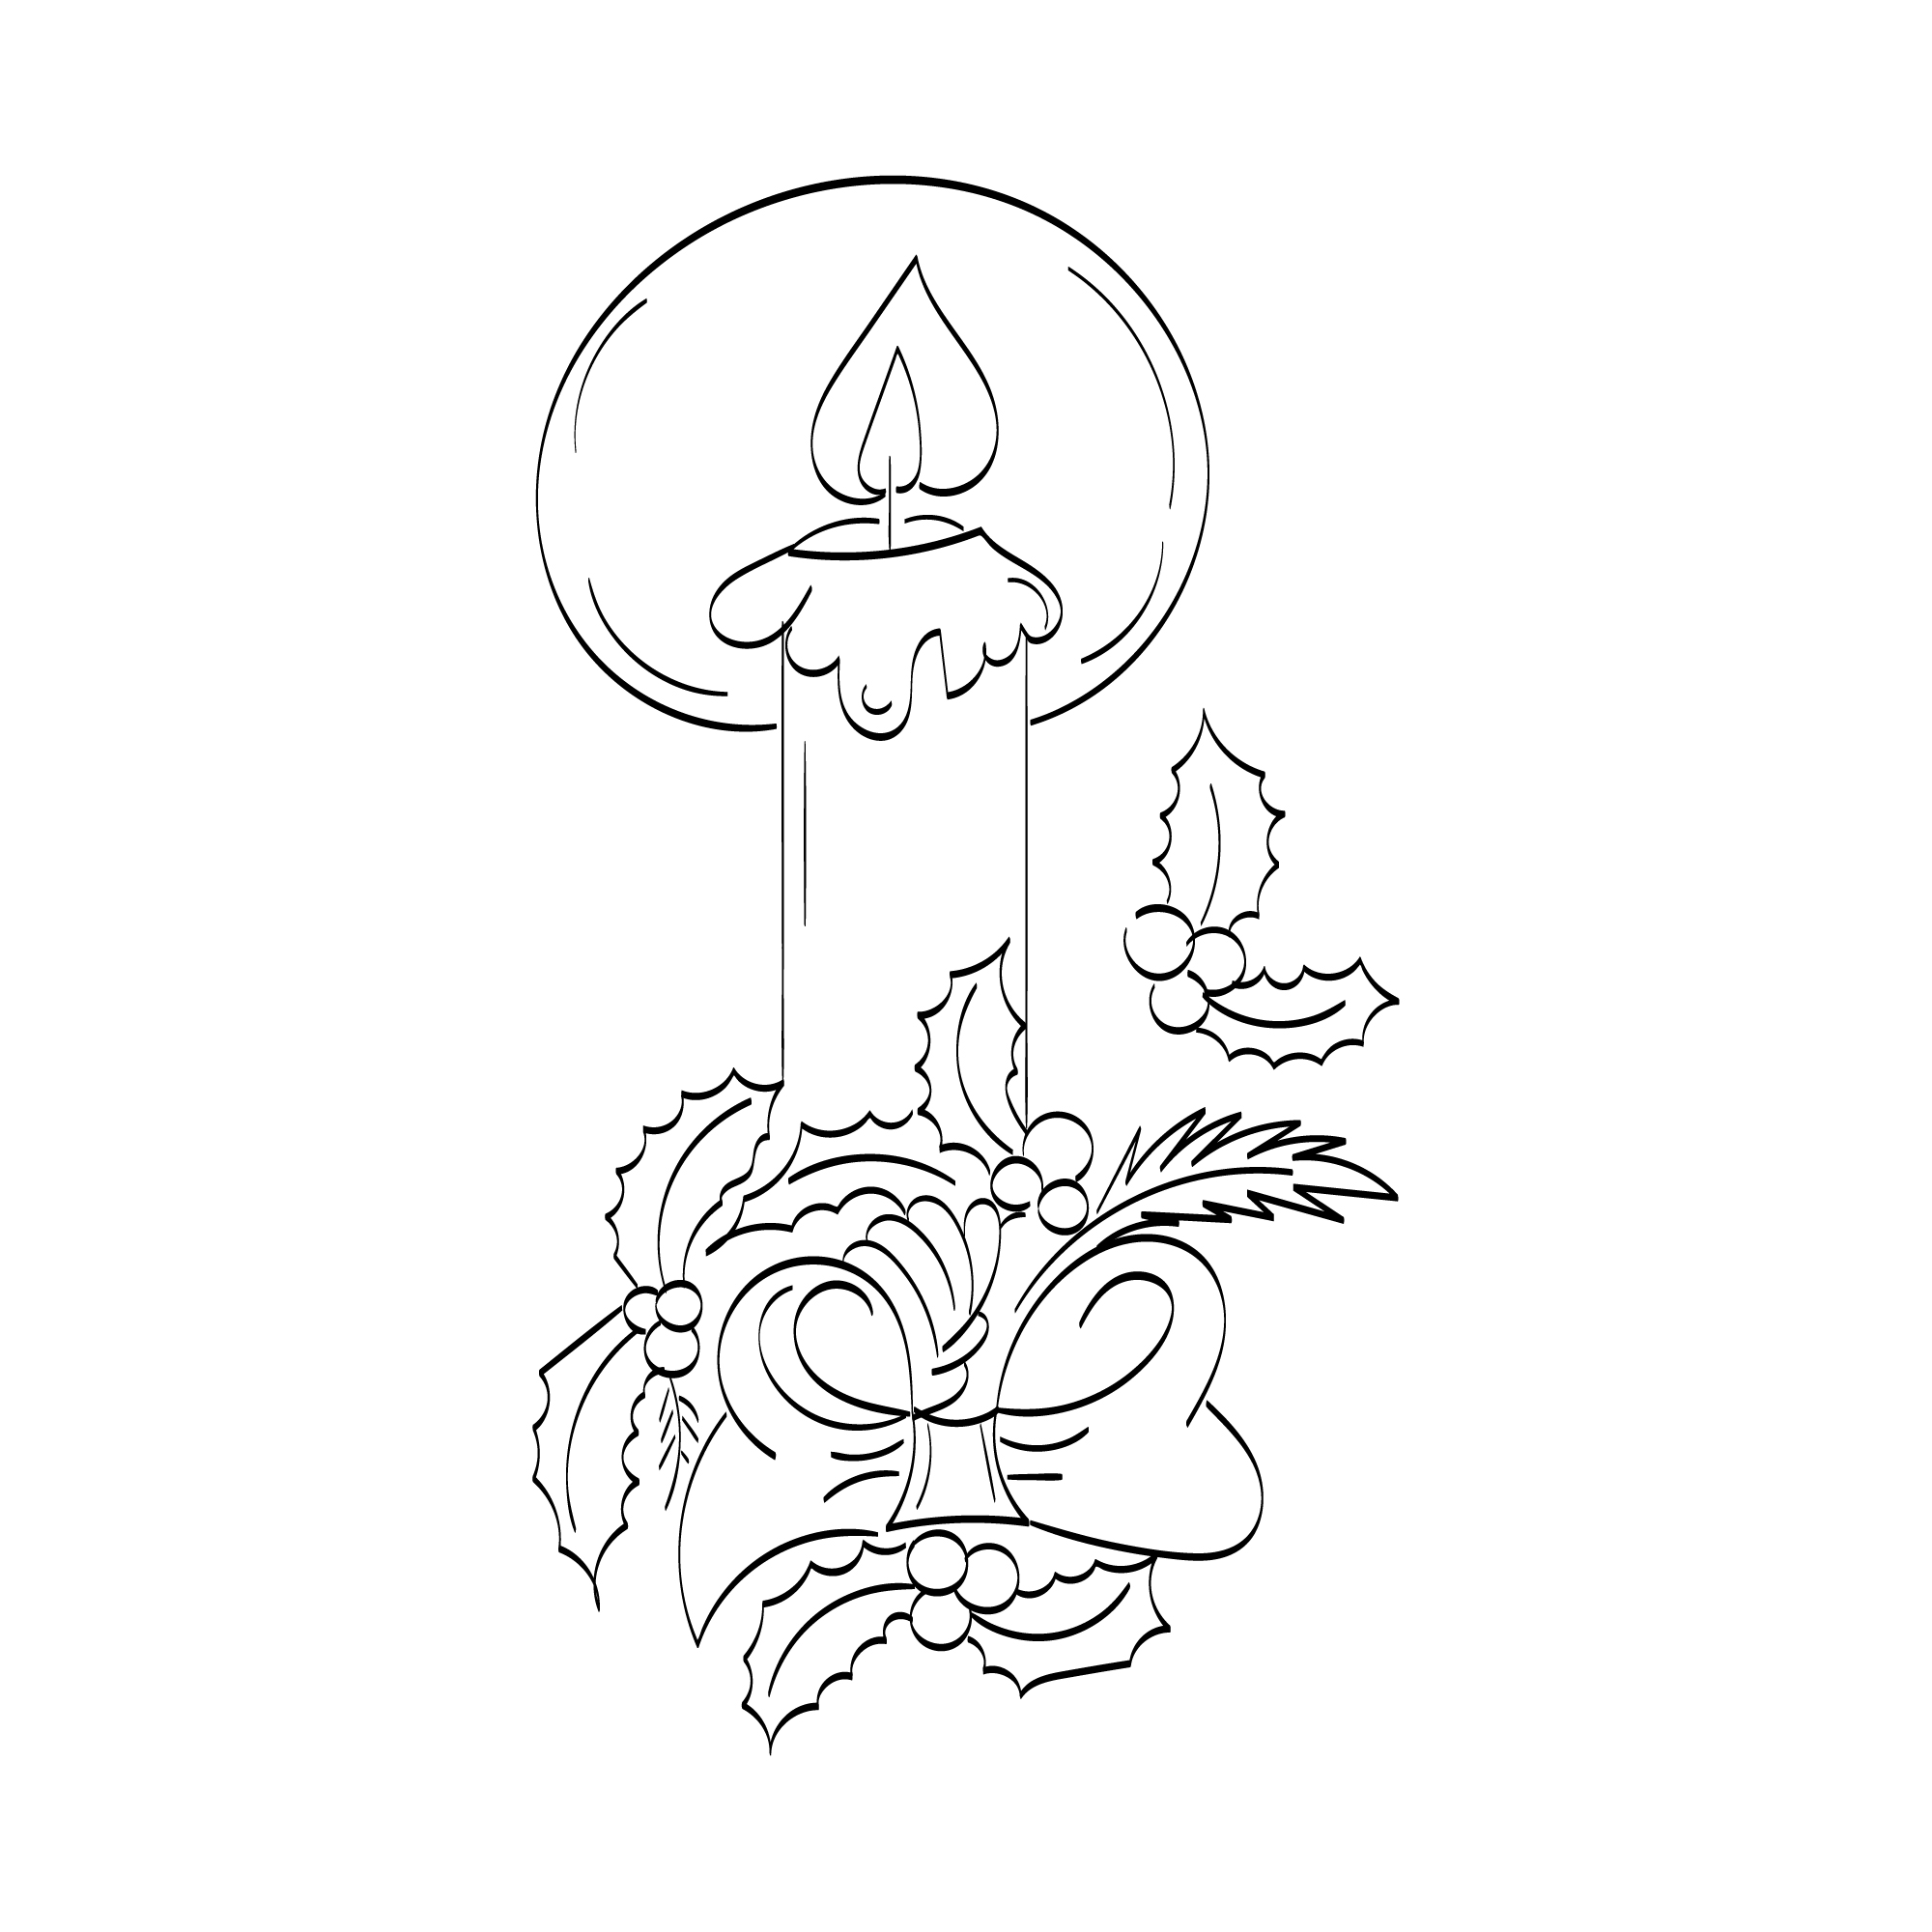 Christmas candle element in line art.